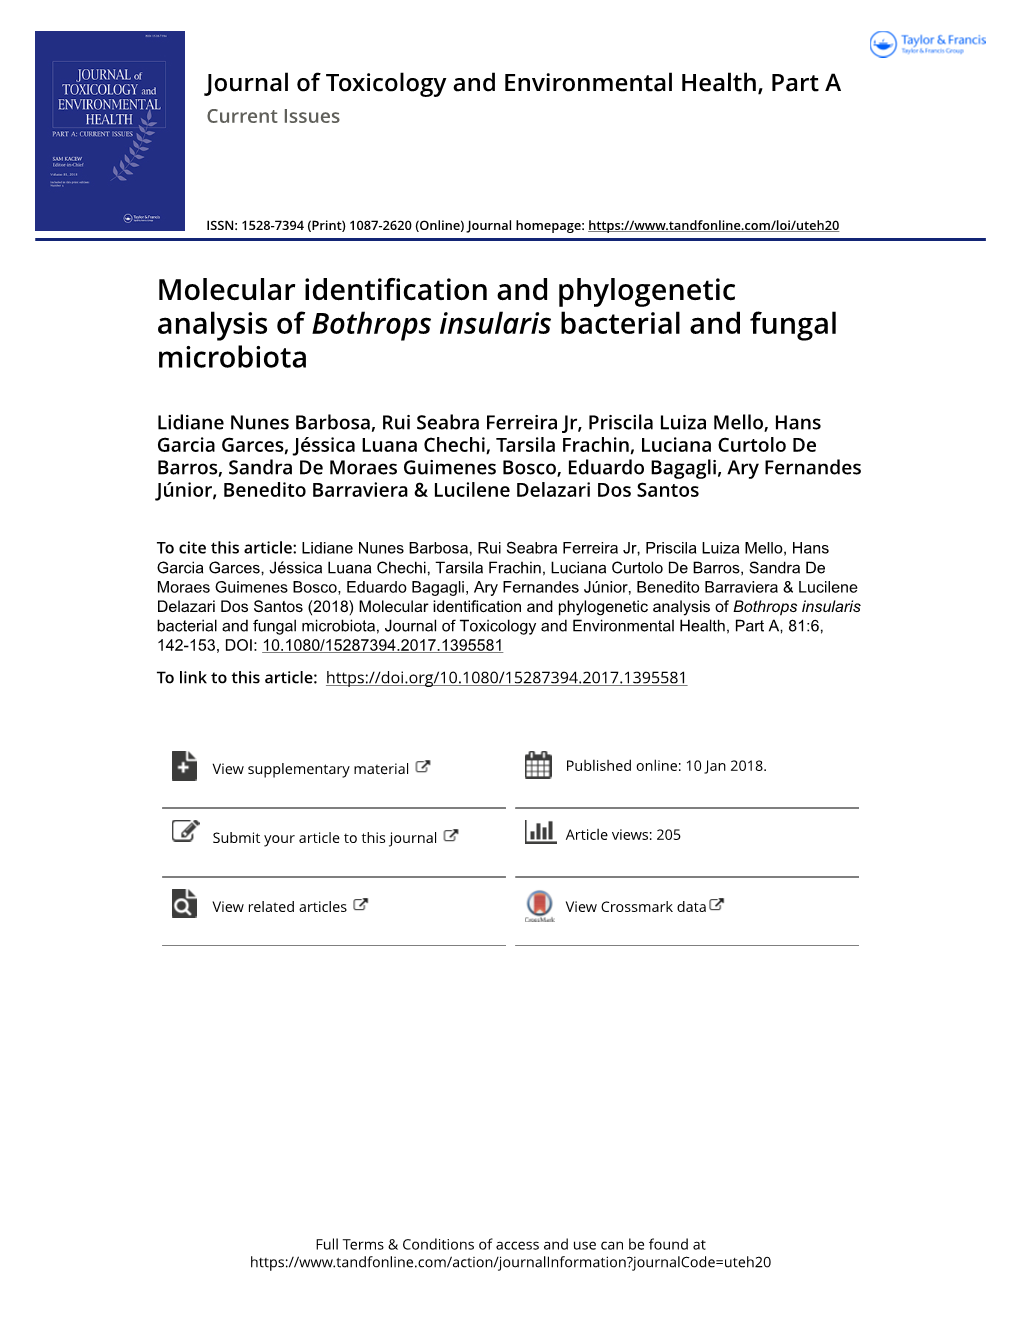 Molecular Identification and Phylogenetic Analysis of Bothrops Insularis Bacterial and Fungal Microbiota